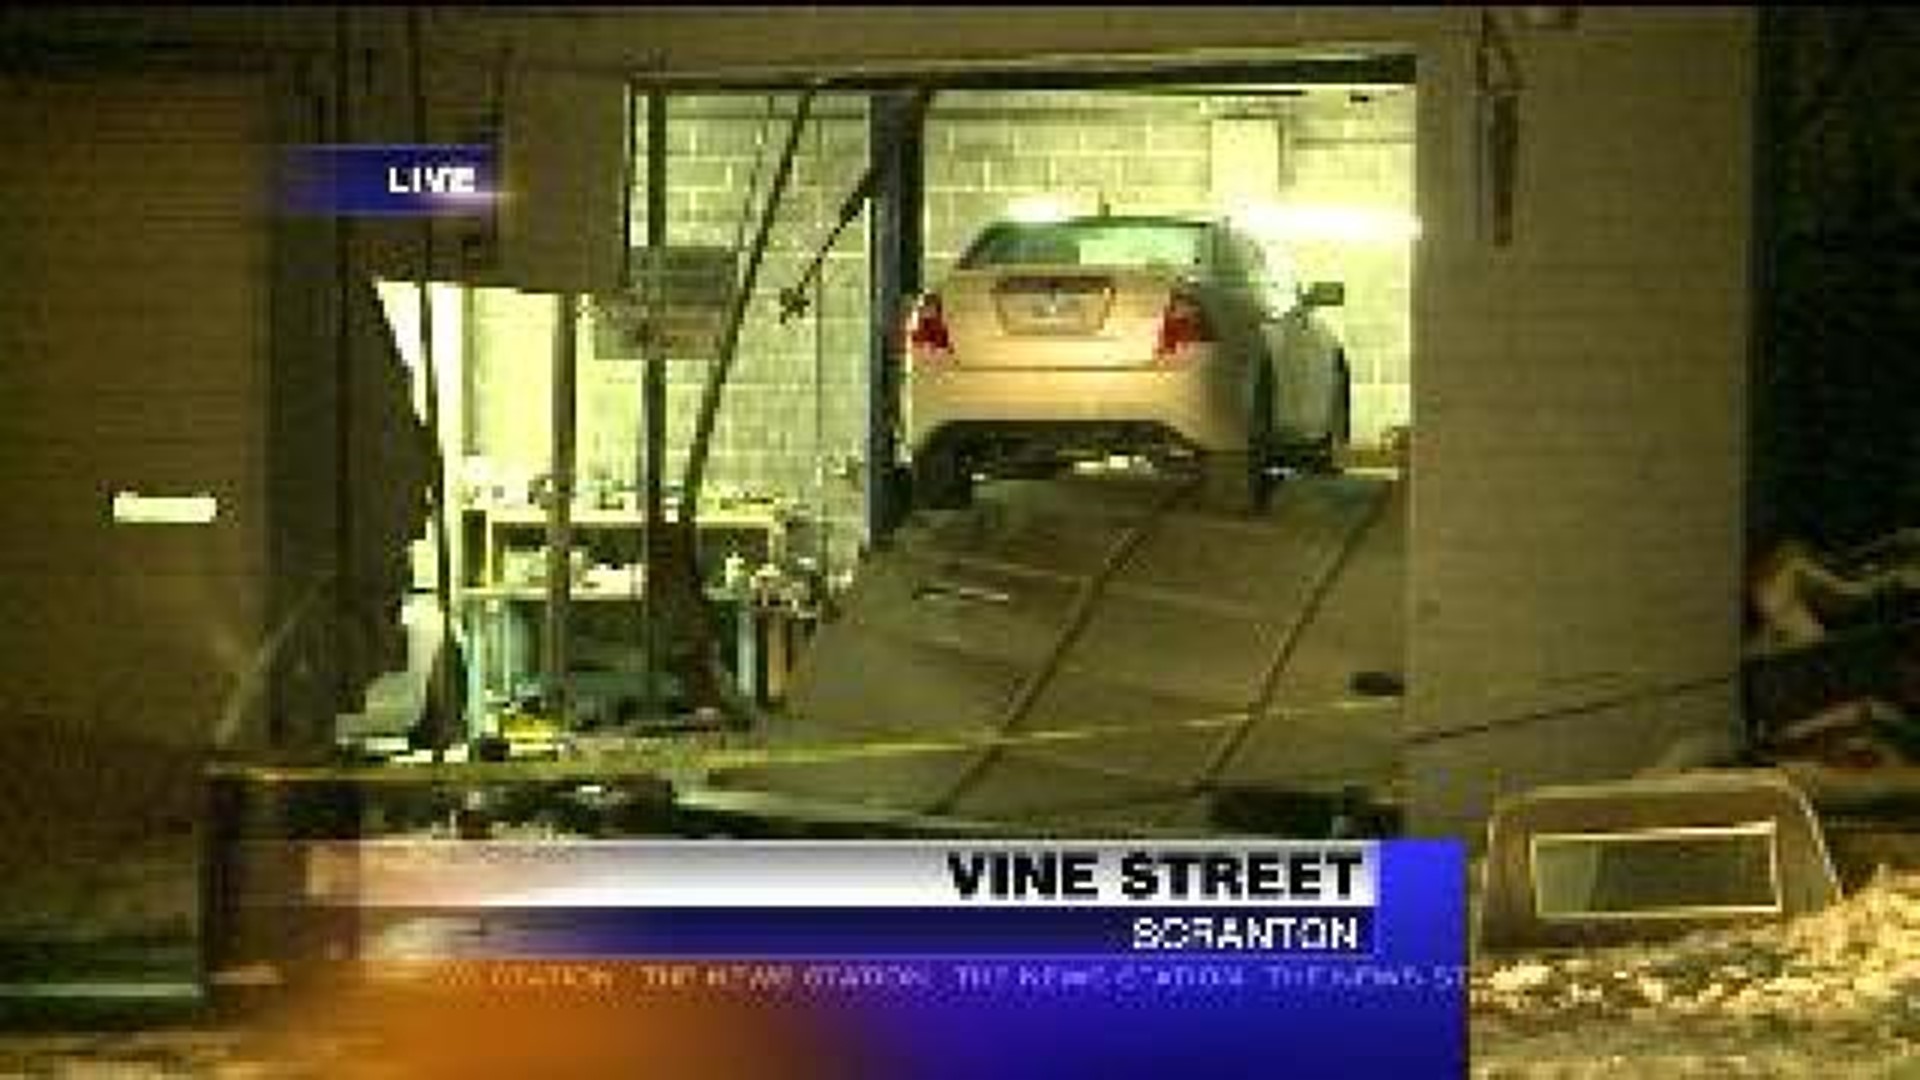 SUV Crashed by Middle School Students in Scranton